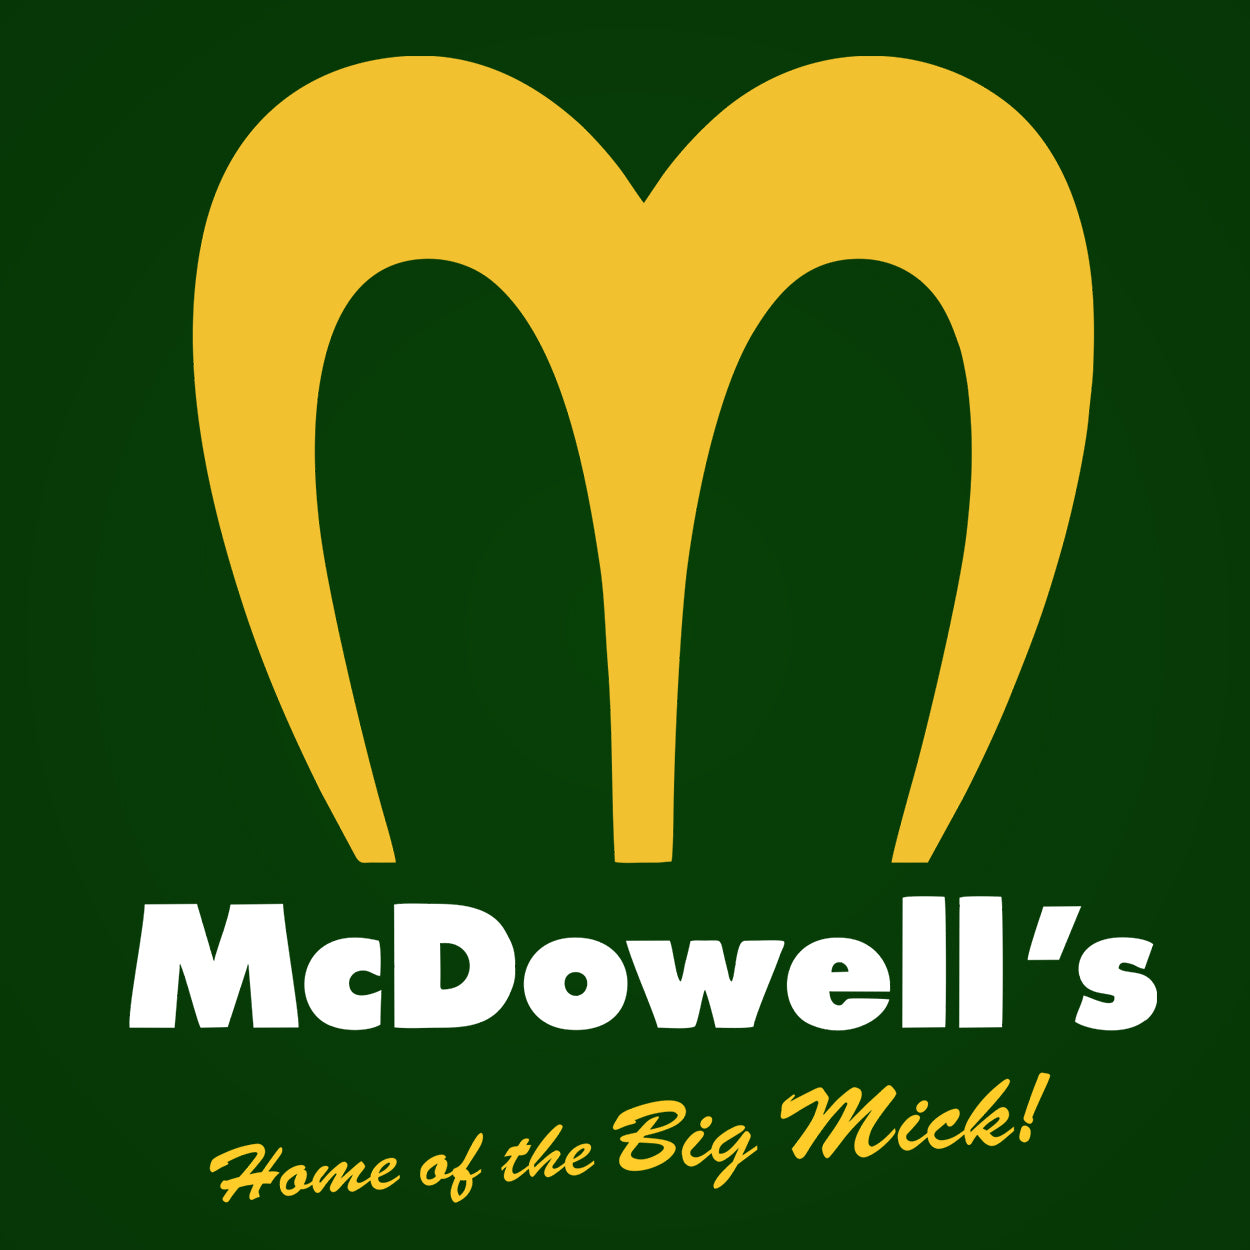 McDowell's Golden Arches Tshirt - Donkey Tees